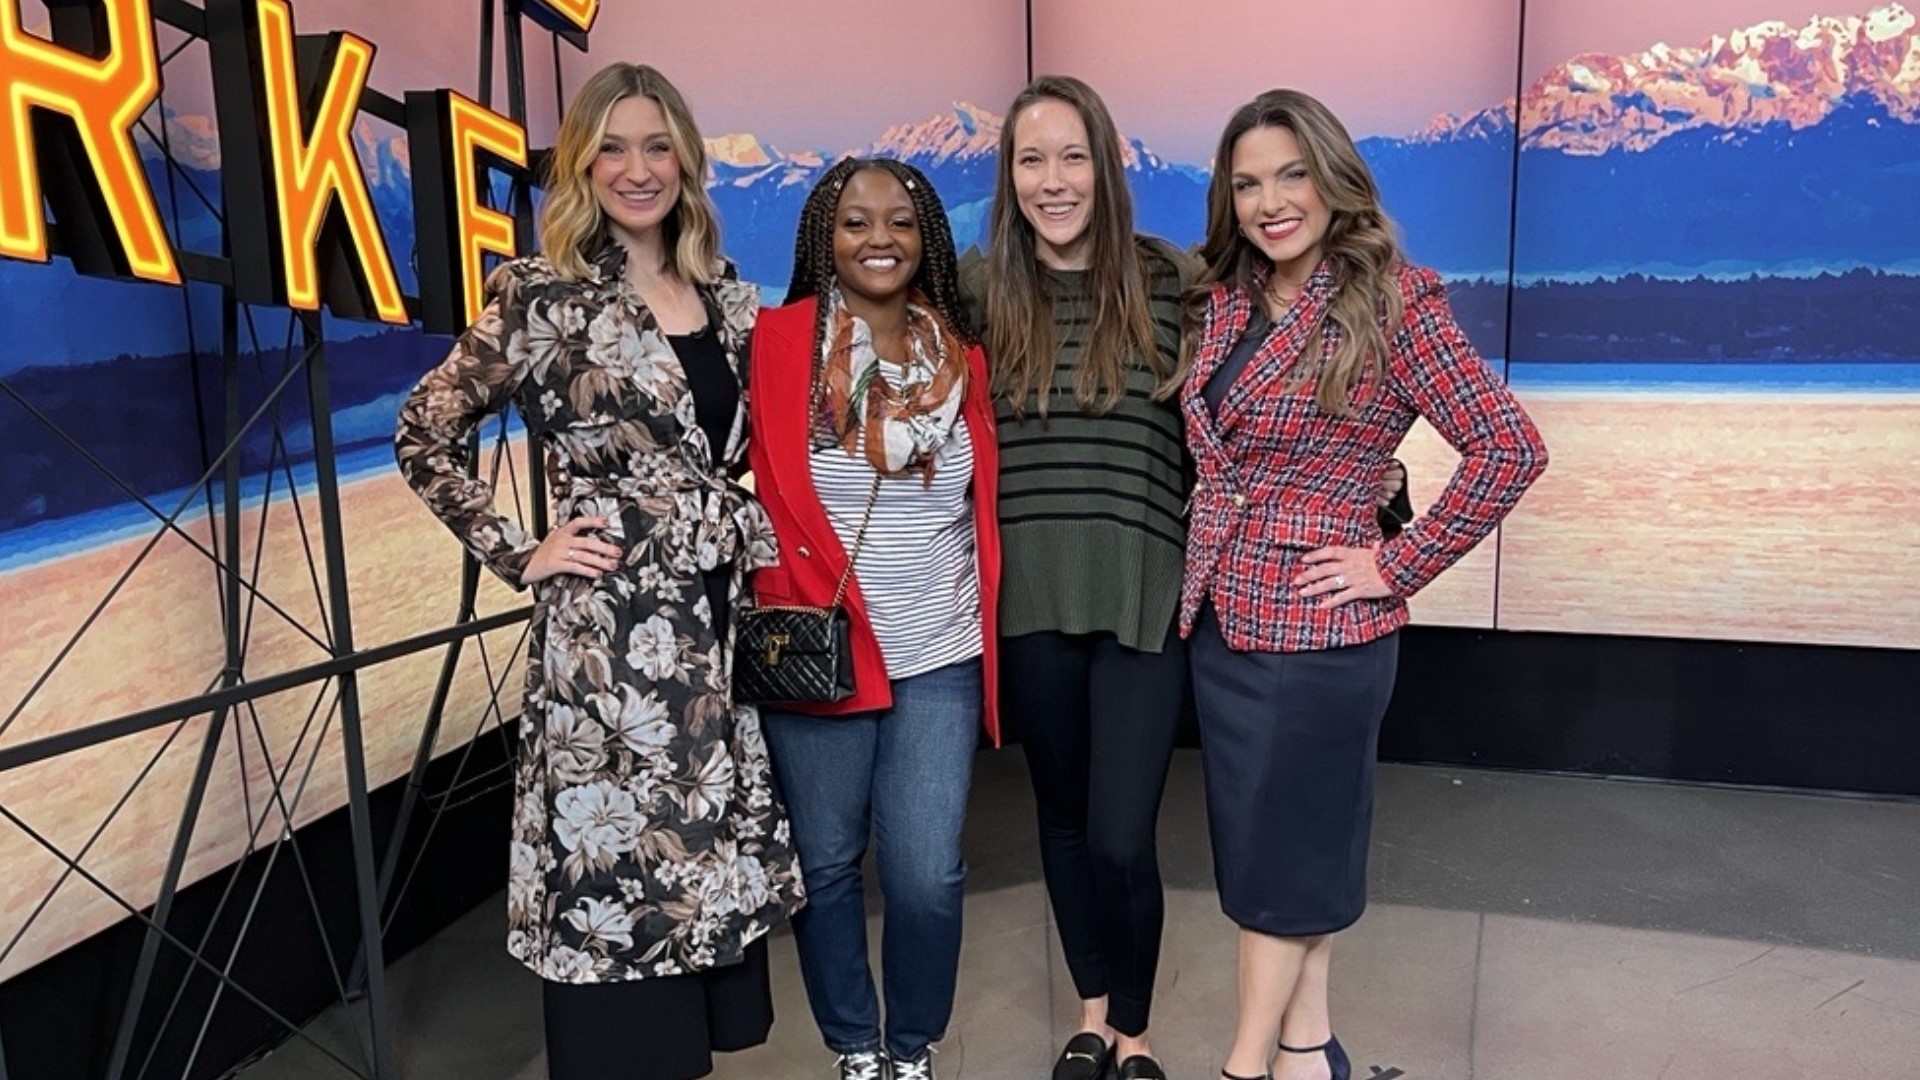 Bellevue Fashion Week just wrapped and stylist Darcy Camden shared her favorite trends to try.